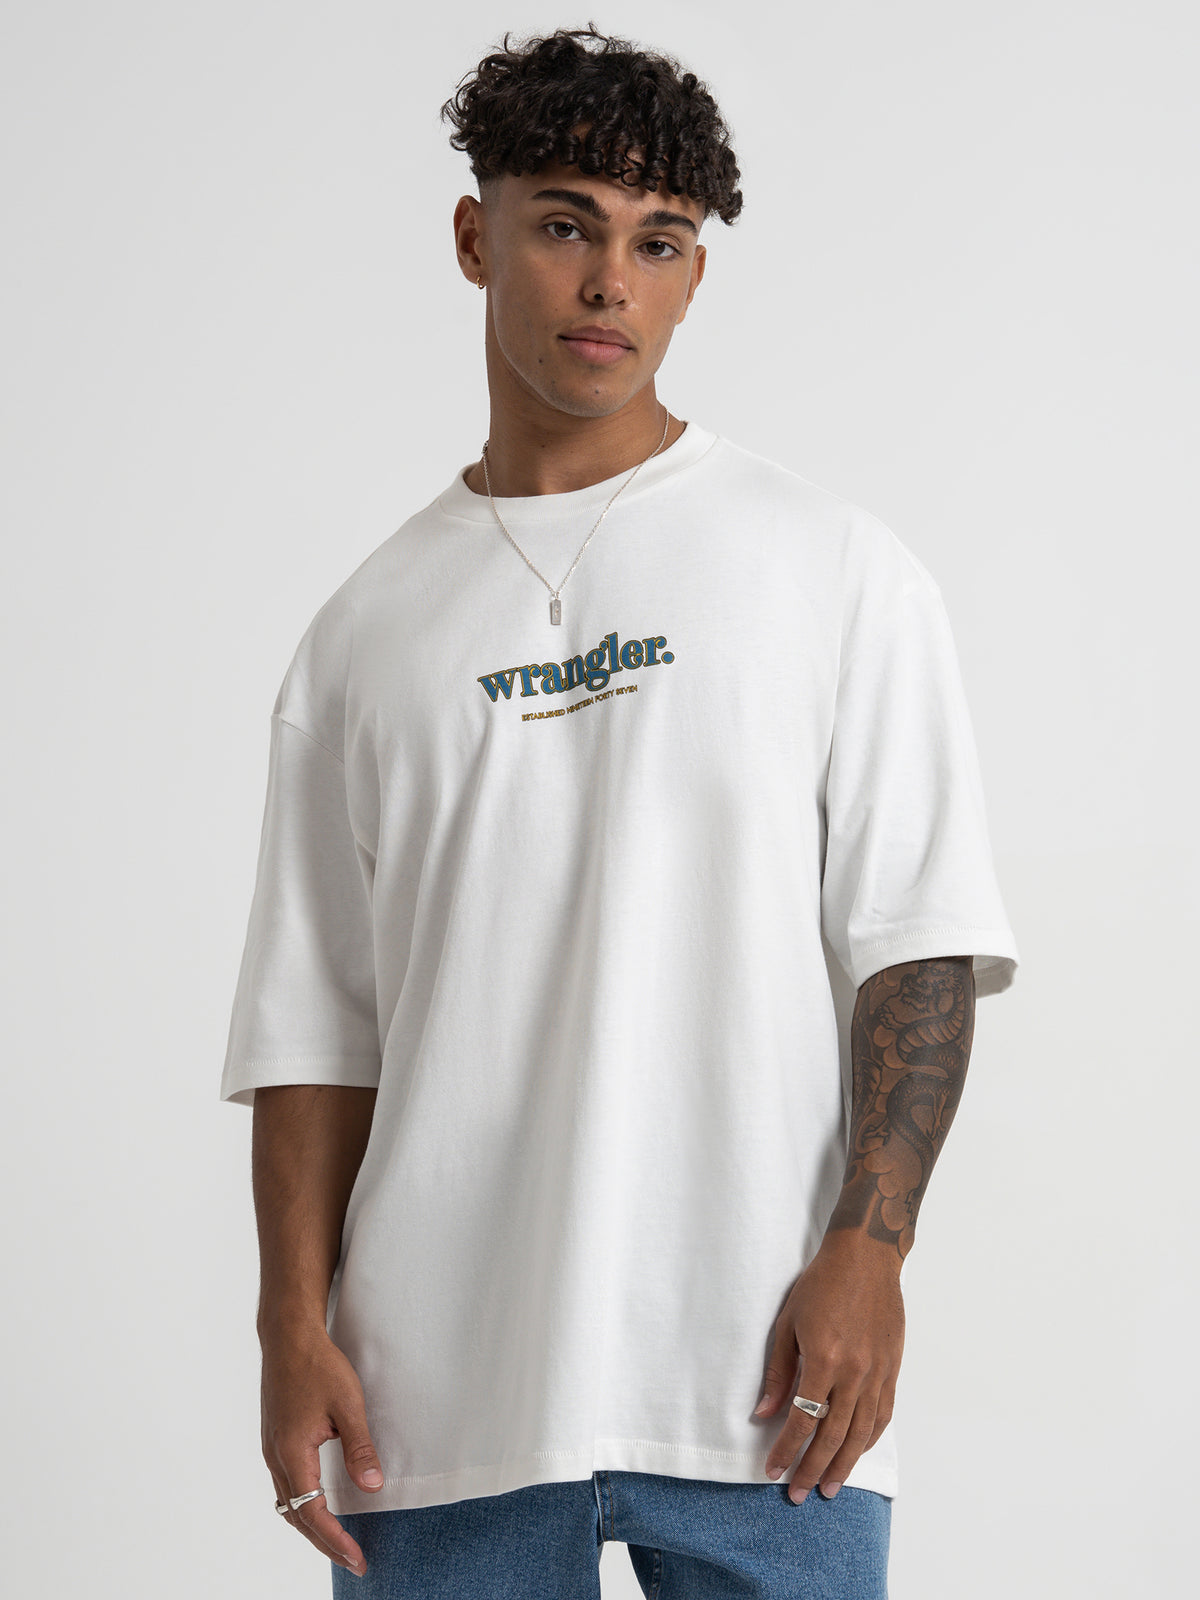 Core Serif Baggy T-Shirt in Vintage White